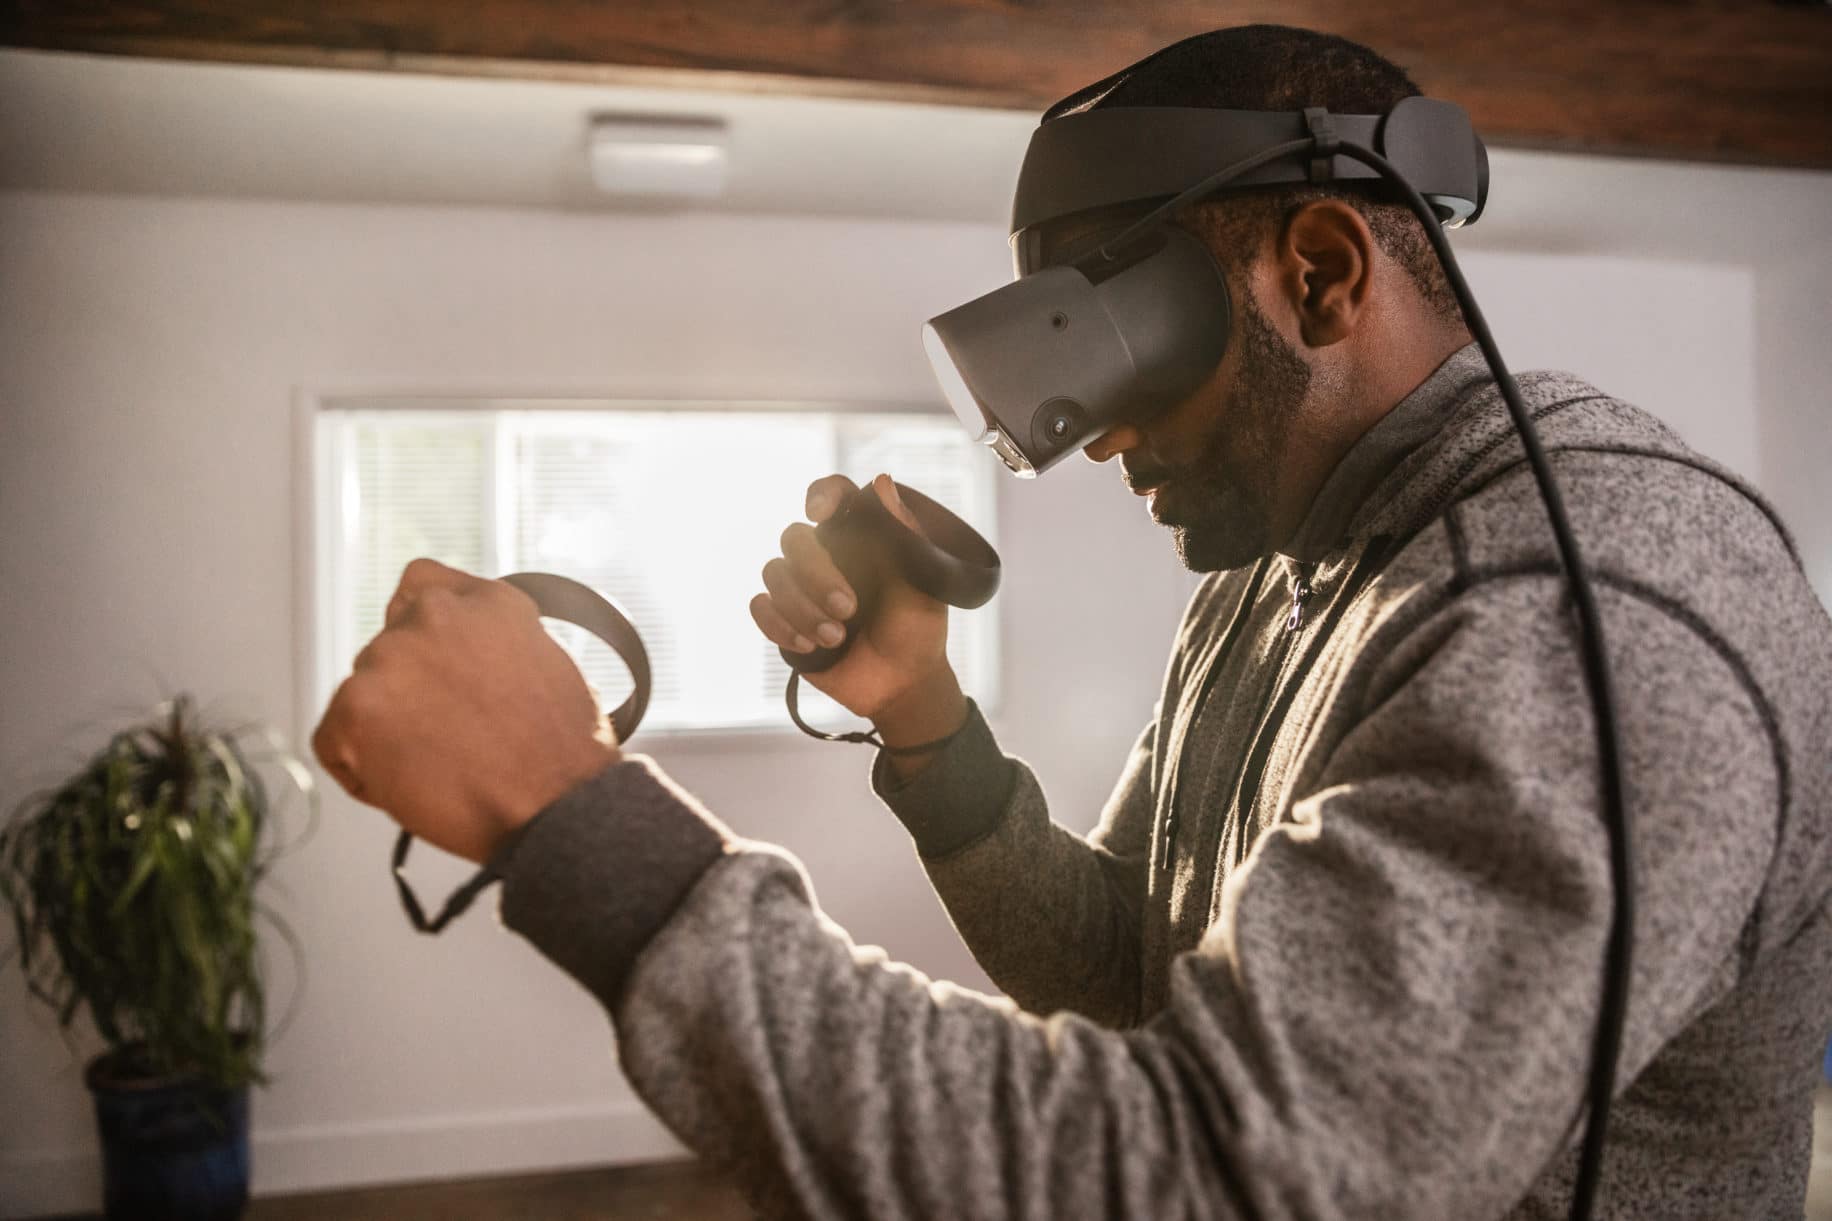 Rift S Hardware Review: A PC VR Headset Focused On Easier Setup And Lowering